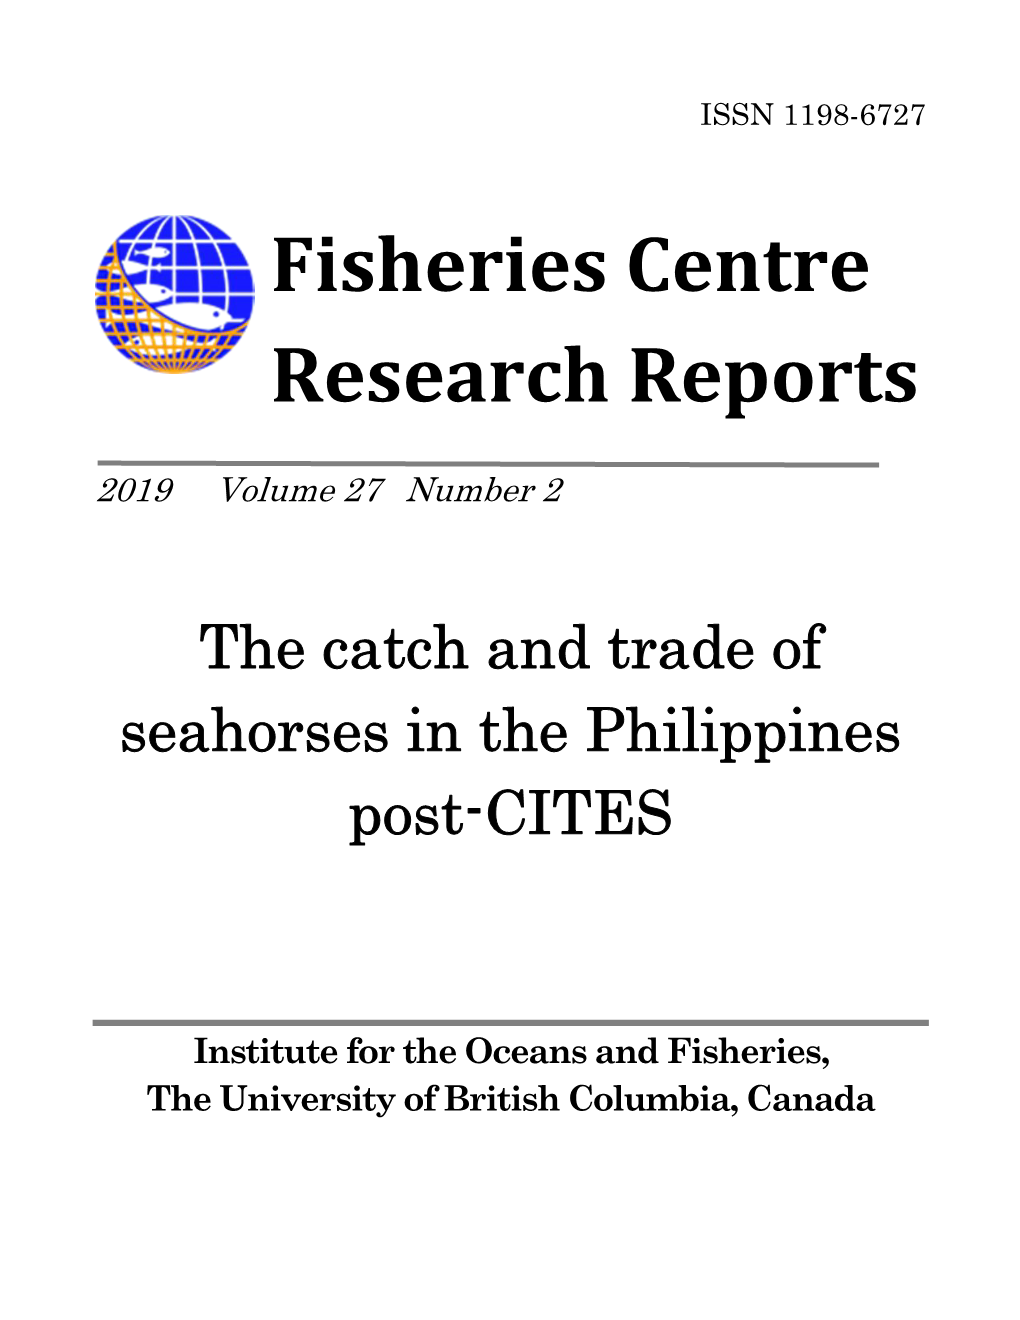 The Catch and Trade of Seahorses in the Philippines Post-CITES